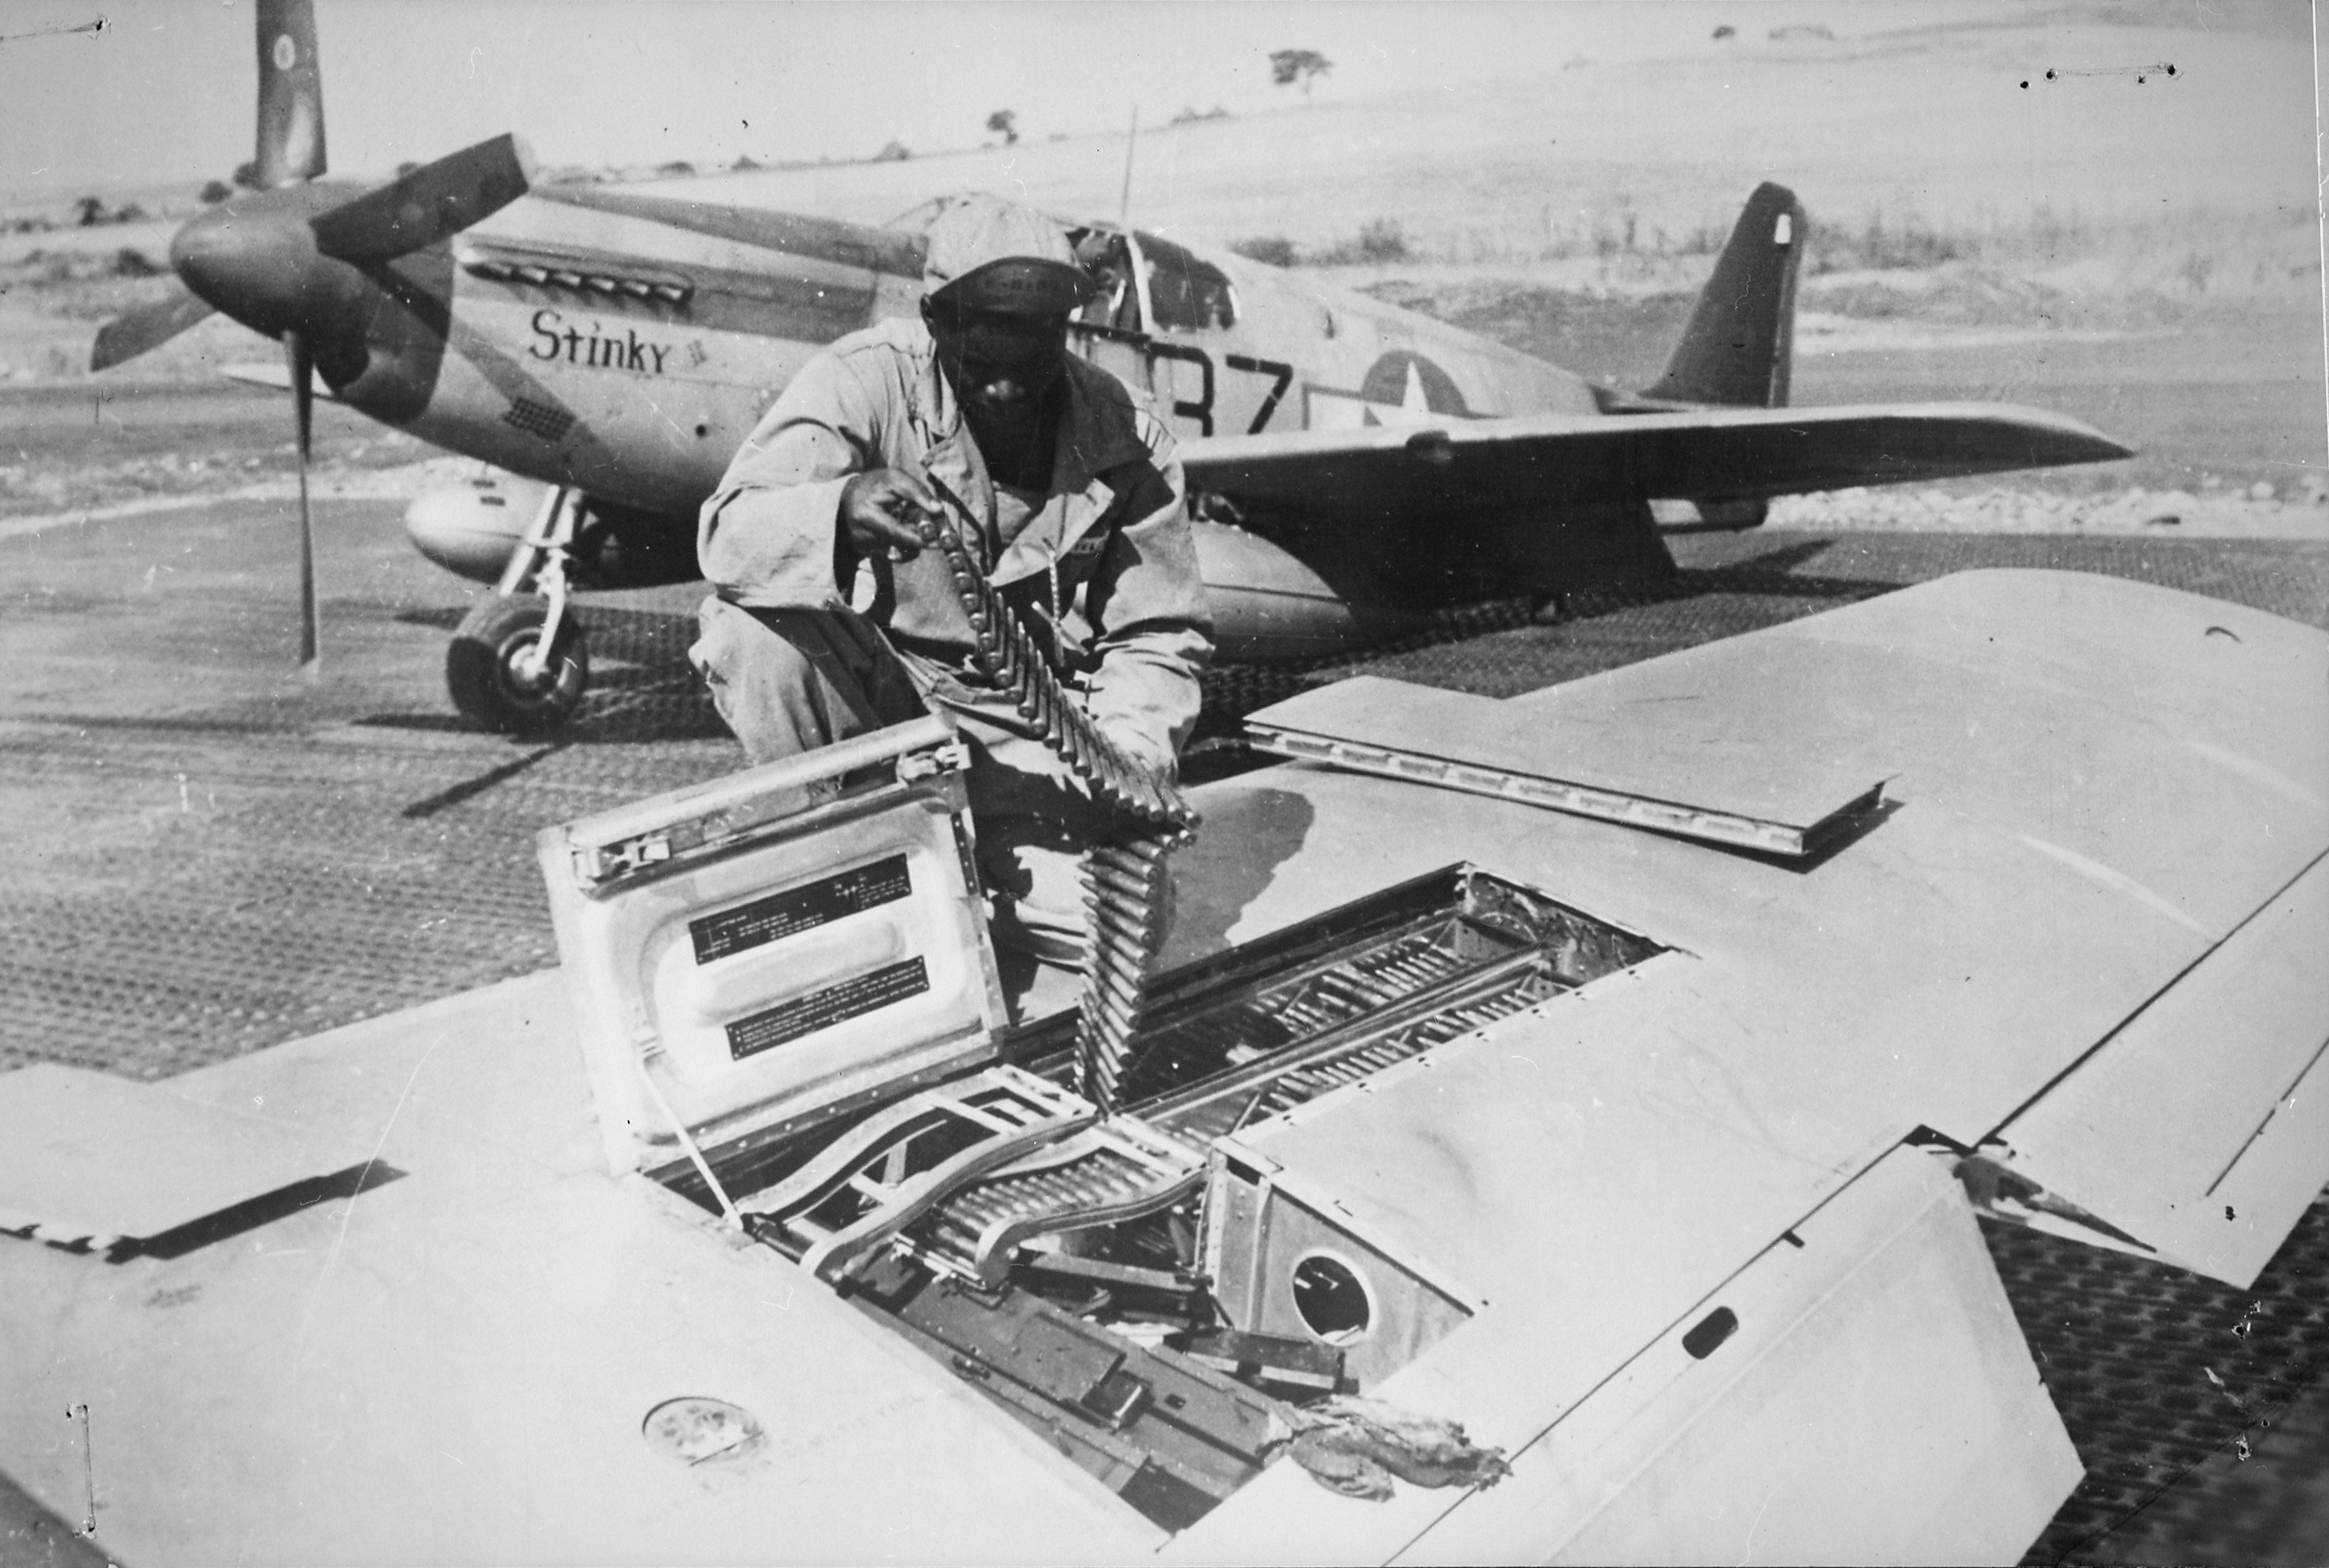 An image of John T. Fields, an armorer with the 332nd Fighter Group.